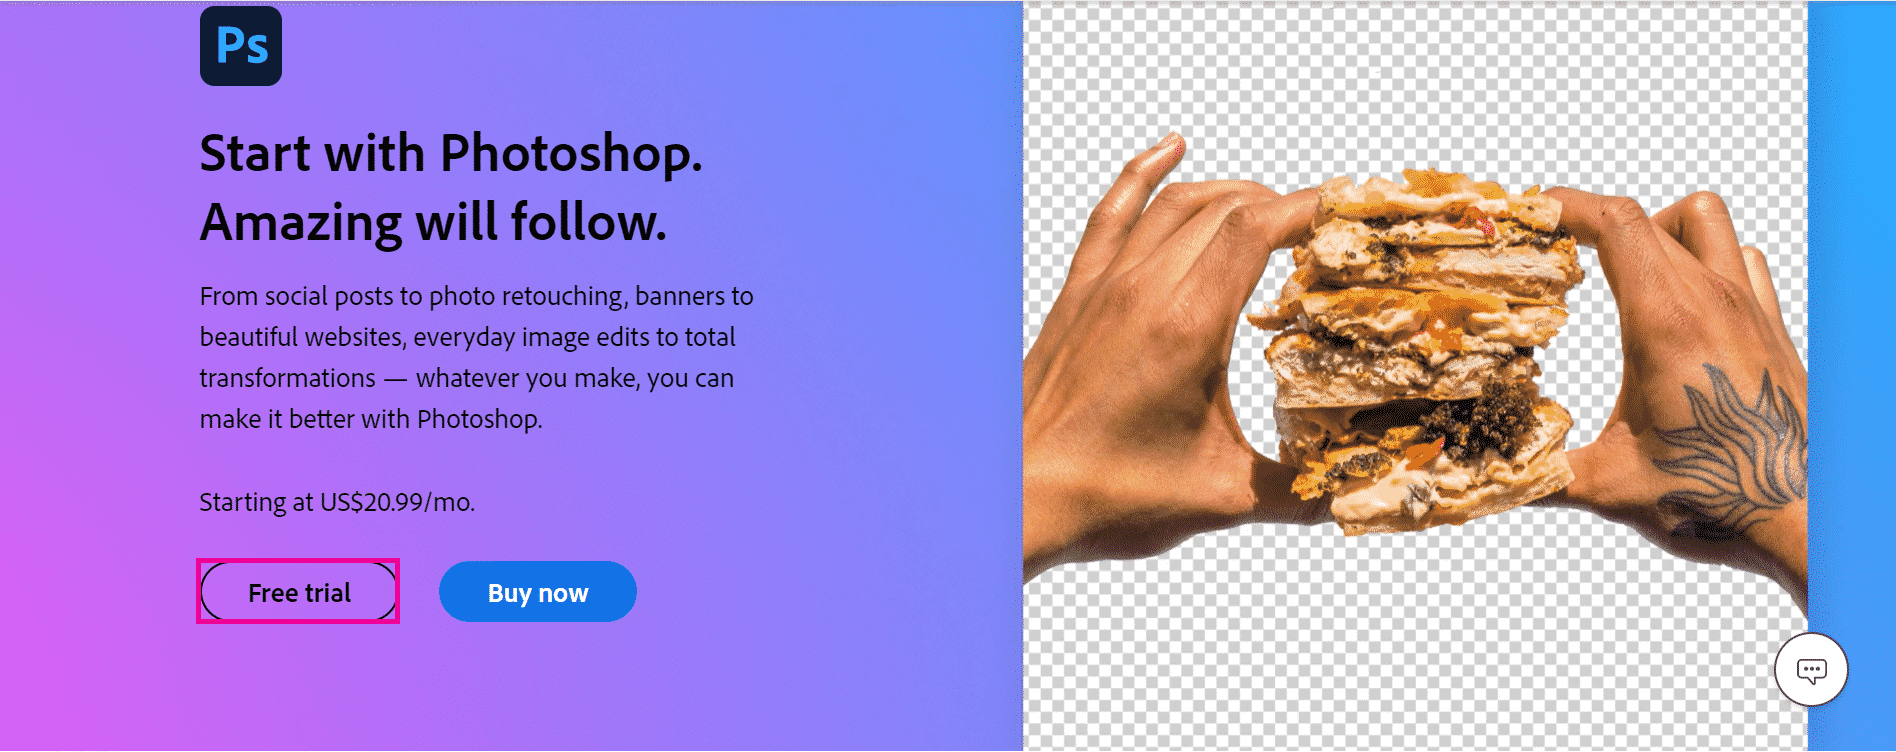 how to get photoshop for free download trial and delete